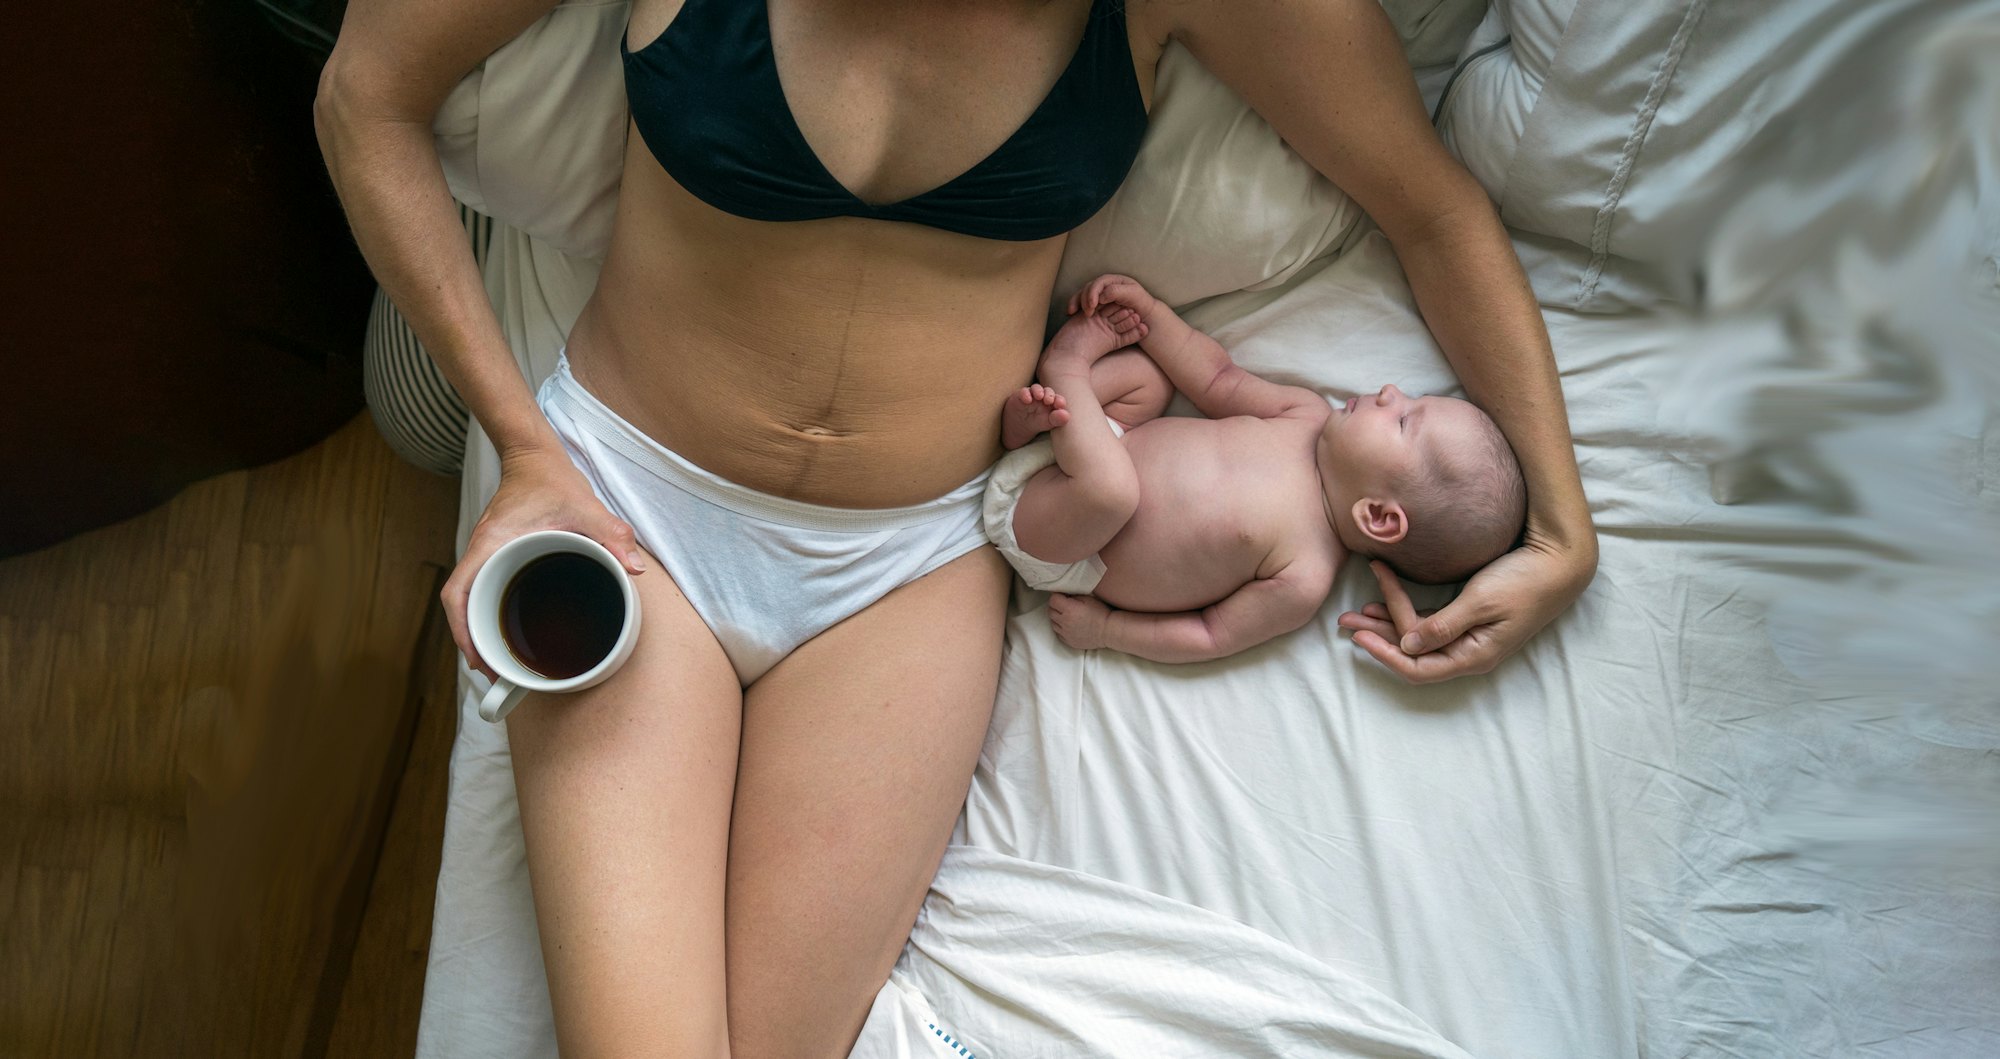 After C-section surgery, do they put your underwear and bra back